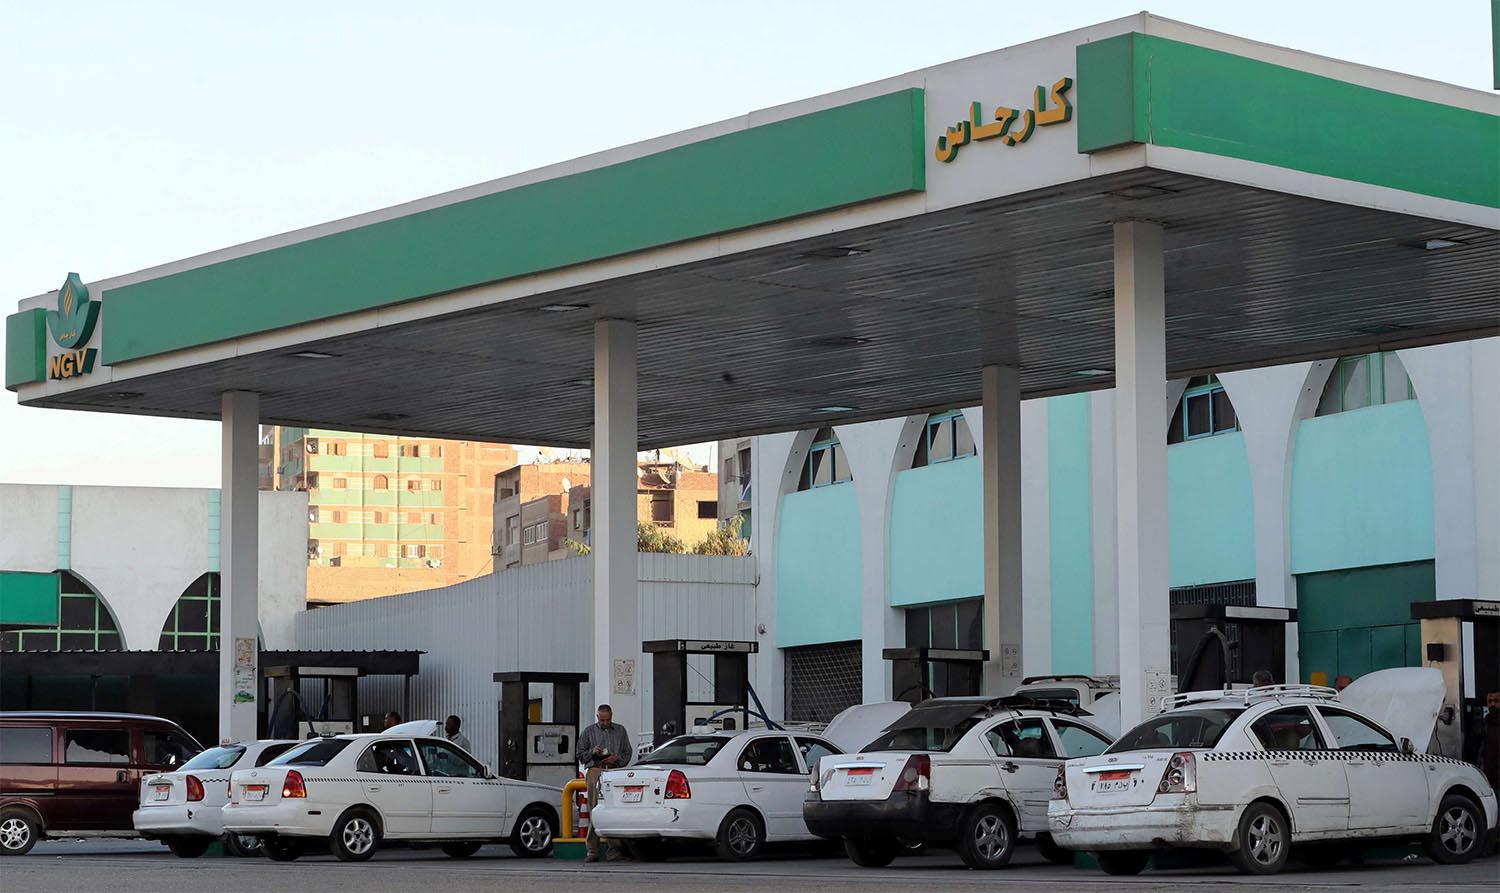 Taxis and cars are filled up with gas at Natural Gas Vehicles (NGV) petrol station in Cairo